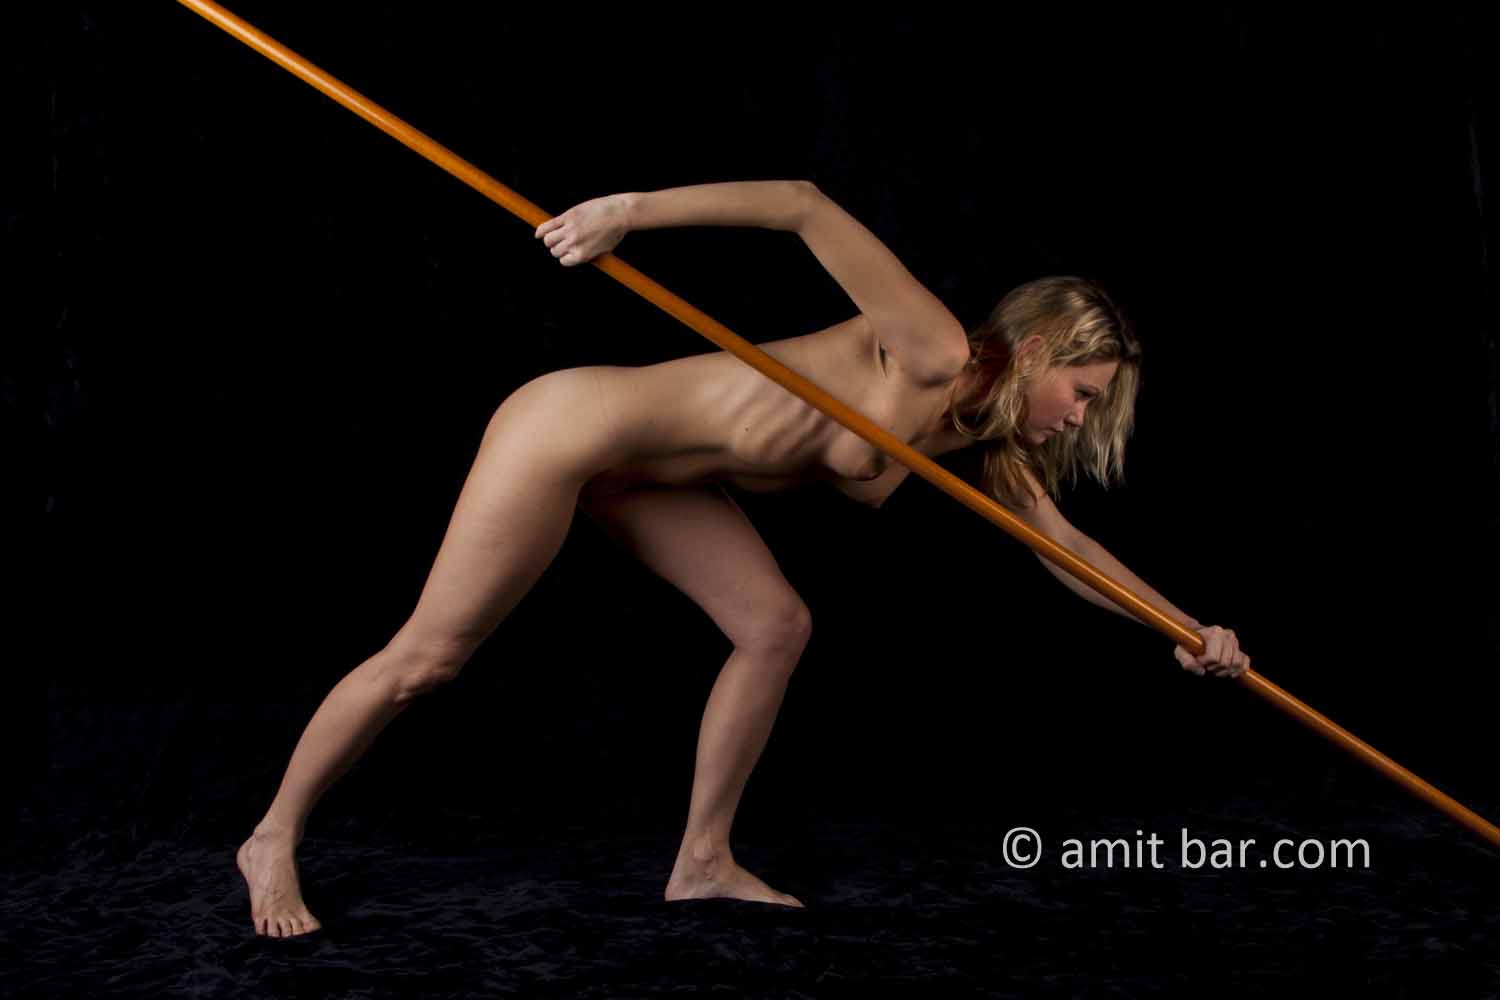 Diagonal I: nude model with a wooden stick